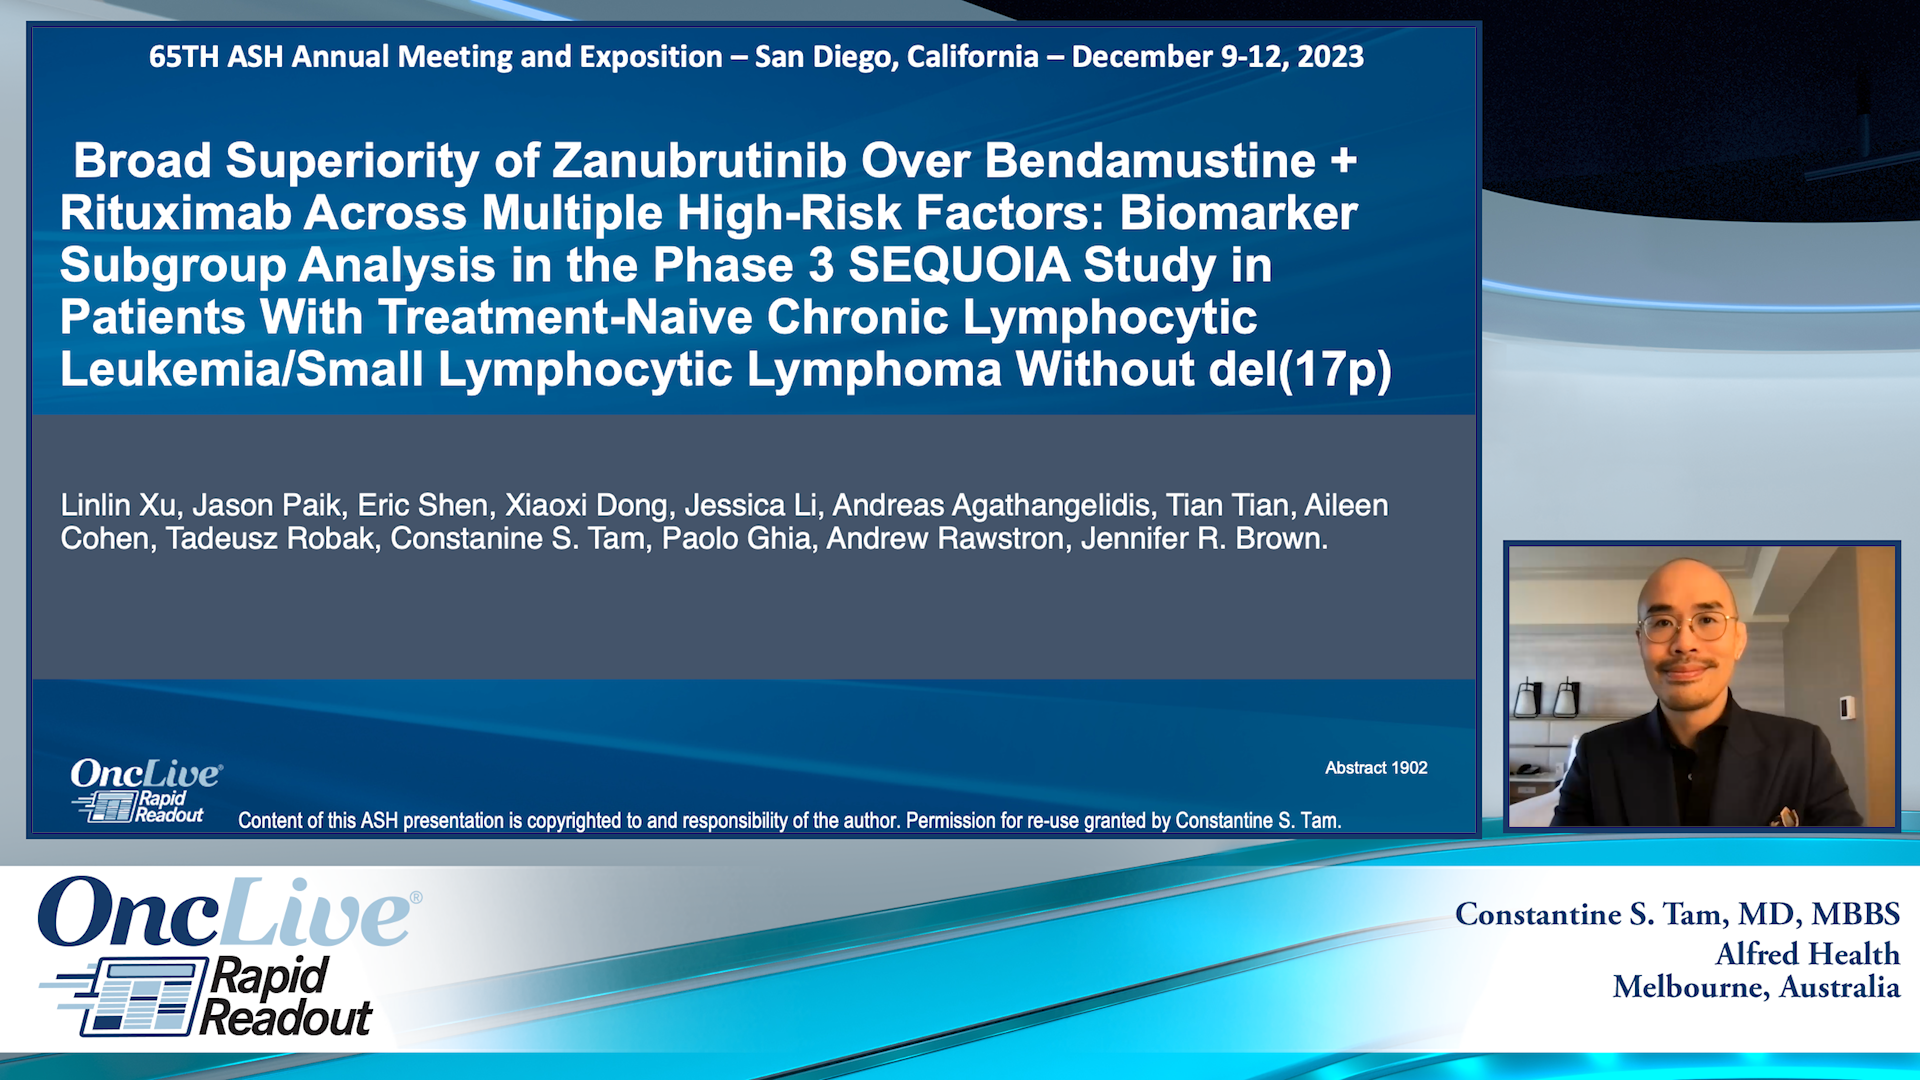 Constantine S. Tam, MD, MBBS, an expert on CLL/SLL